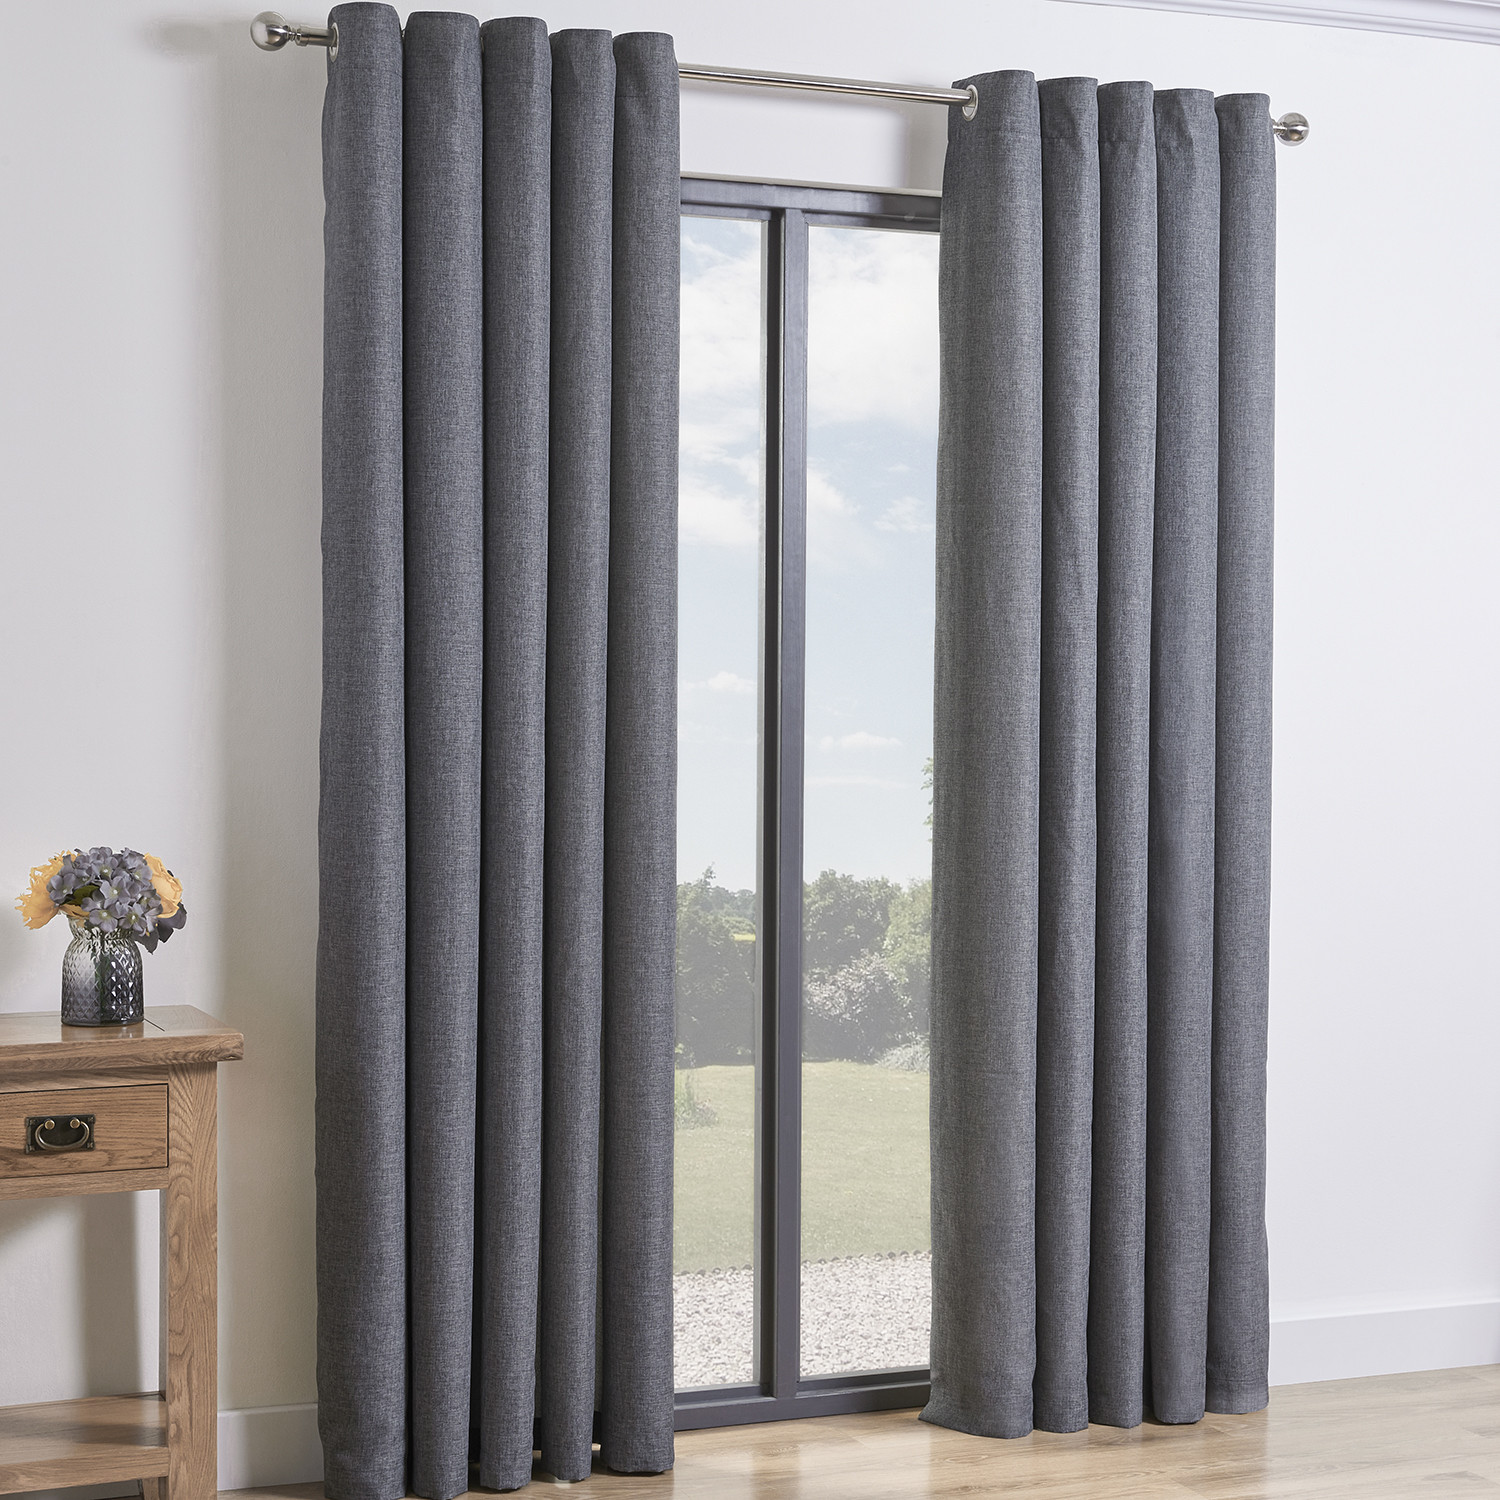 My Home Taylor Charcoal Eyelet Curtains 168 x 137cm Image 1